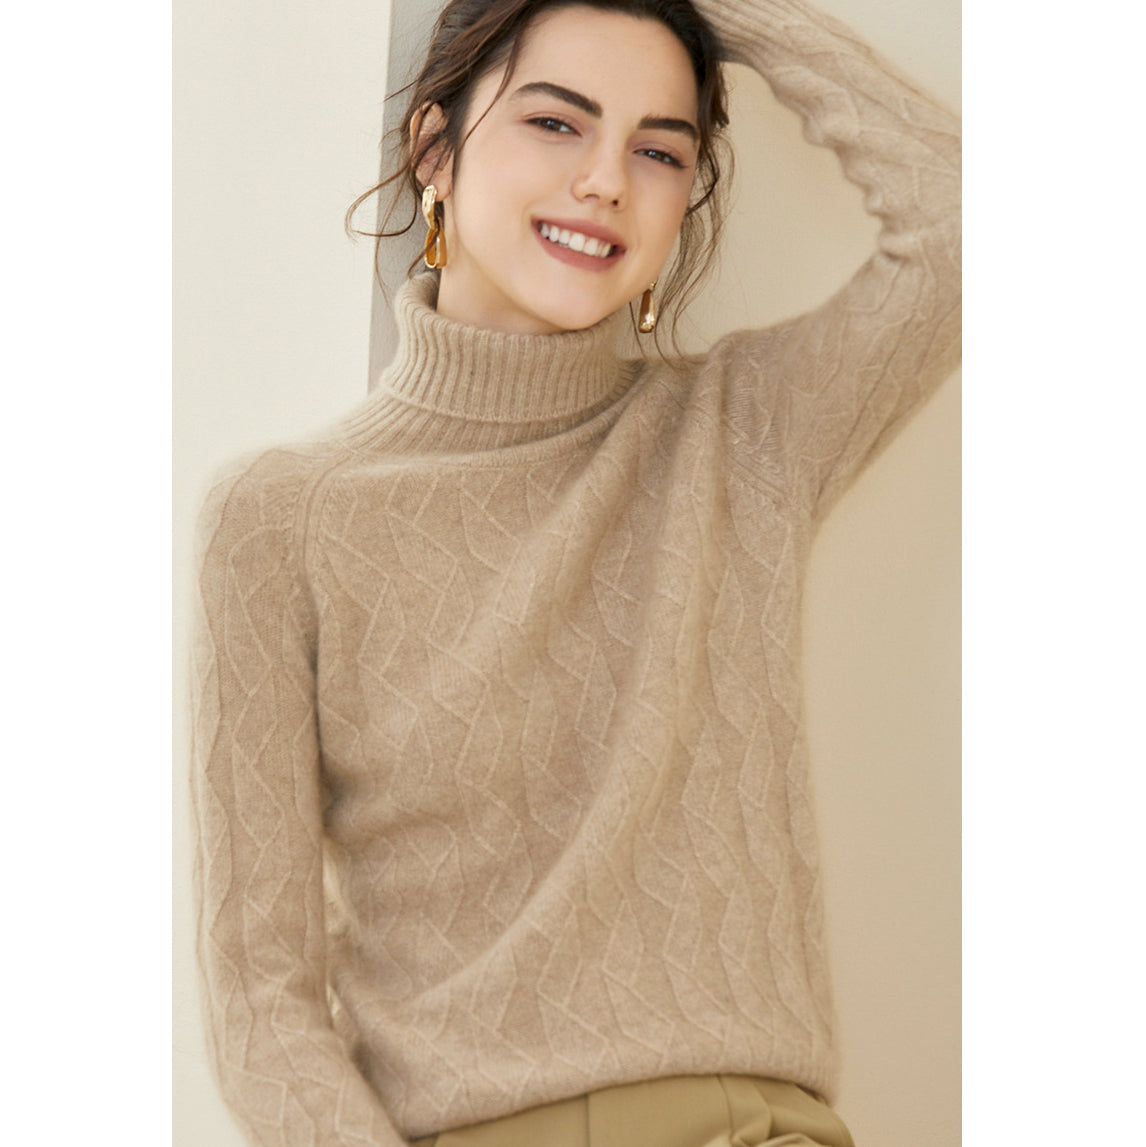 Women's Turtleneck Cashmere Sweater Long Sleeve Warm Pullover Cashmere Tops